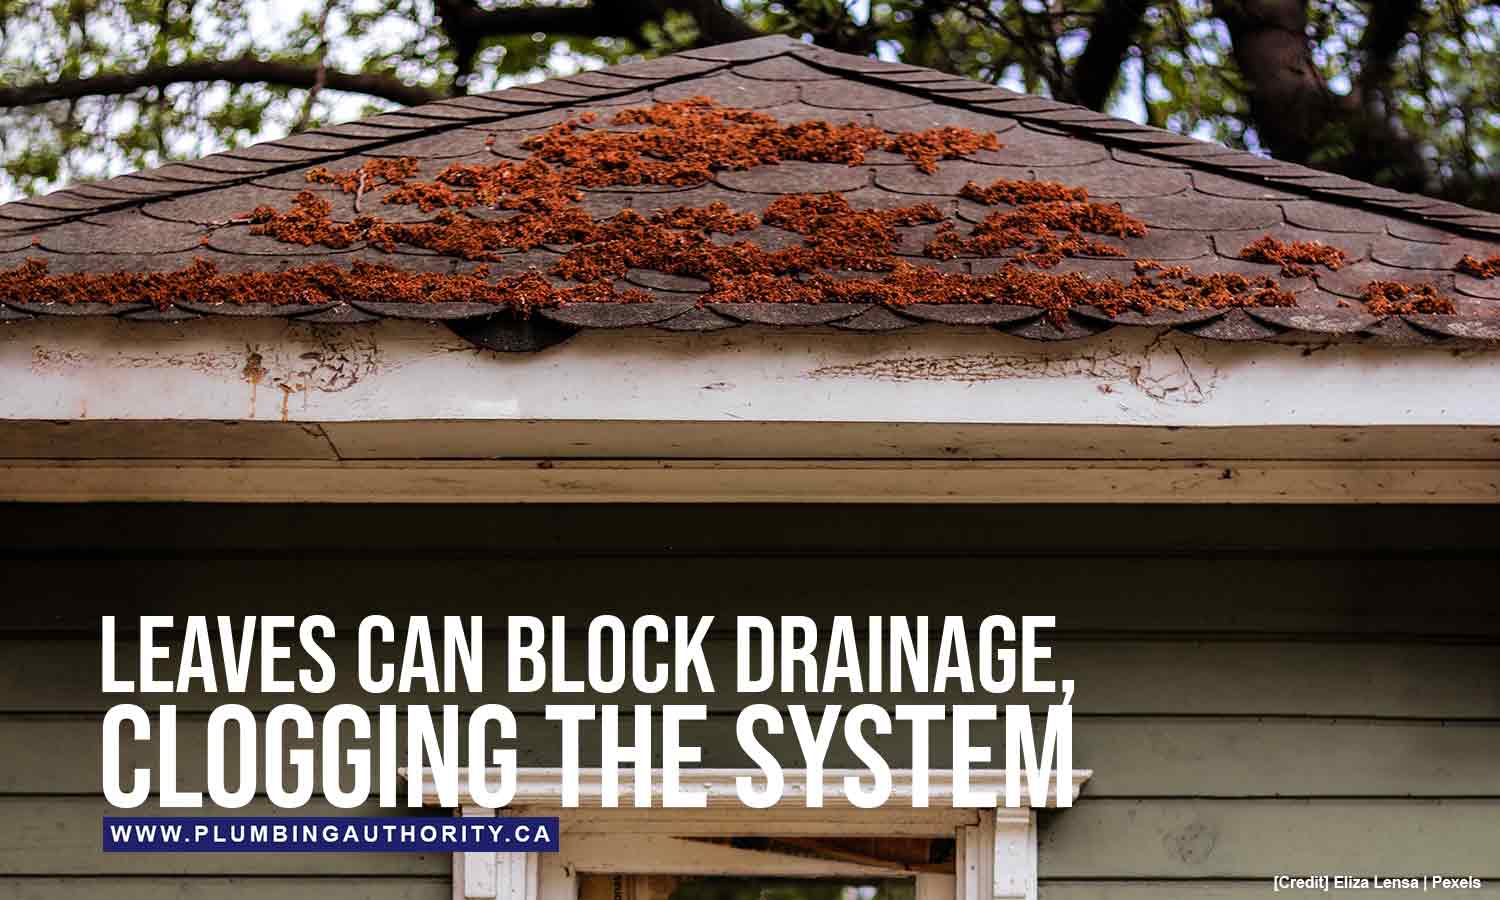 Leaves can block drainage